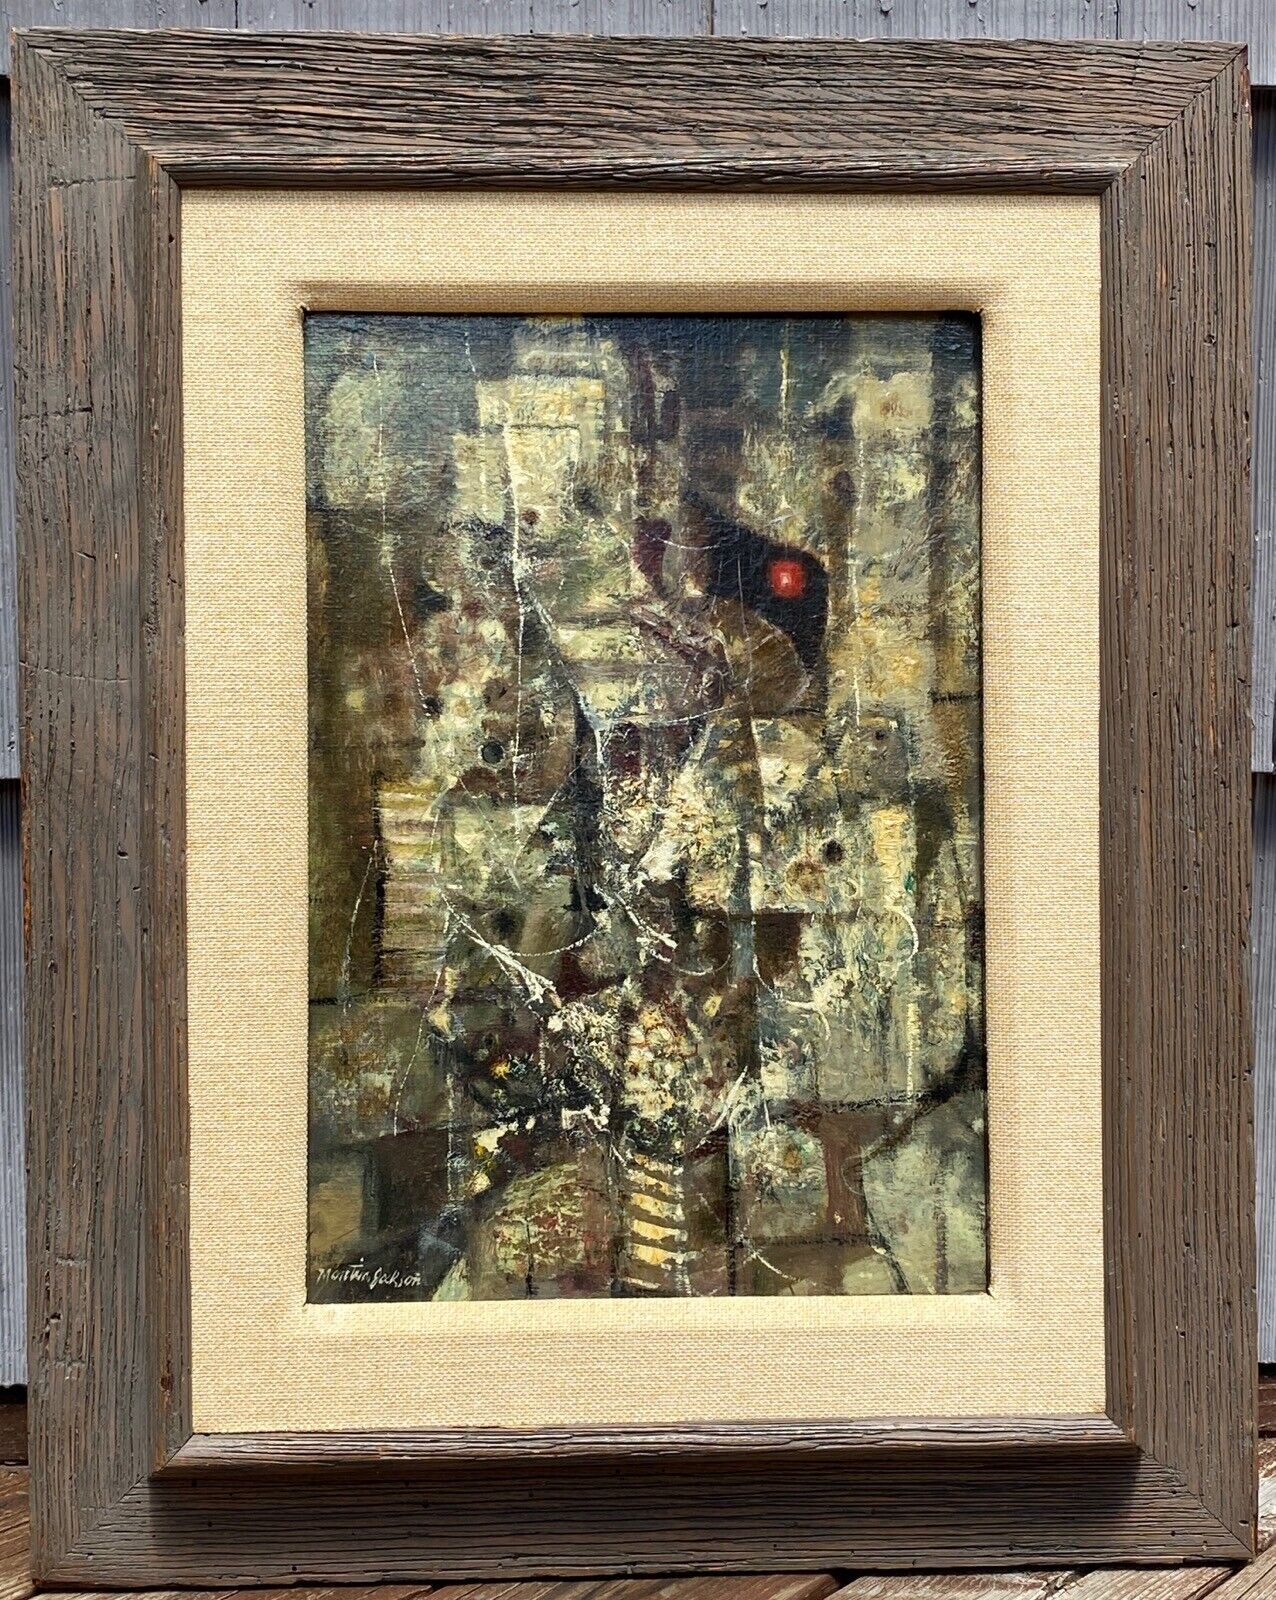 Martin Jackson (PHL PA 1919-1986 Listed) Mid Century Cubist Oil Painting, Titled